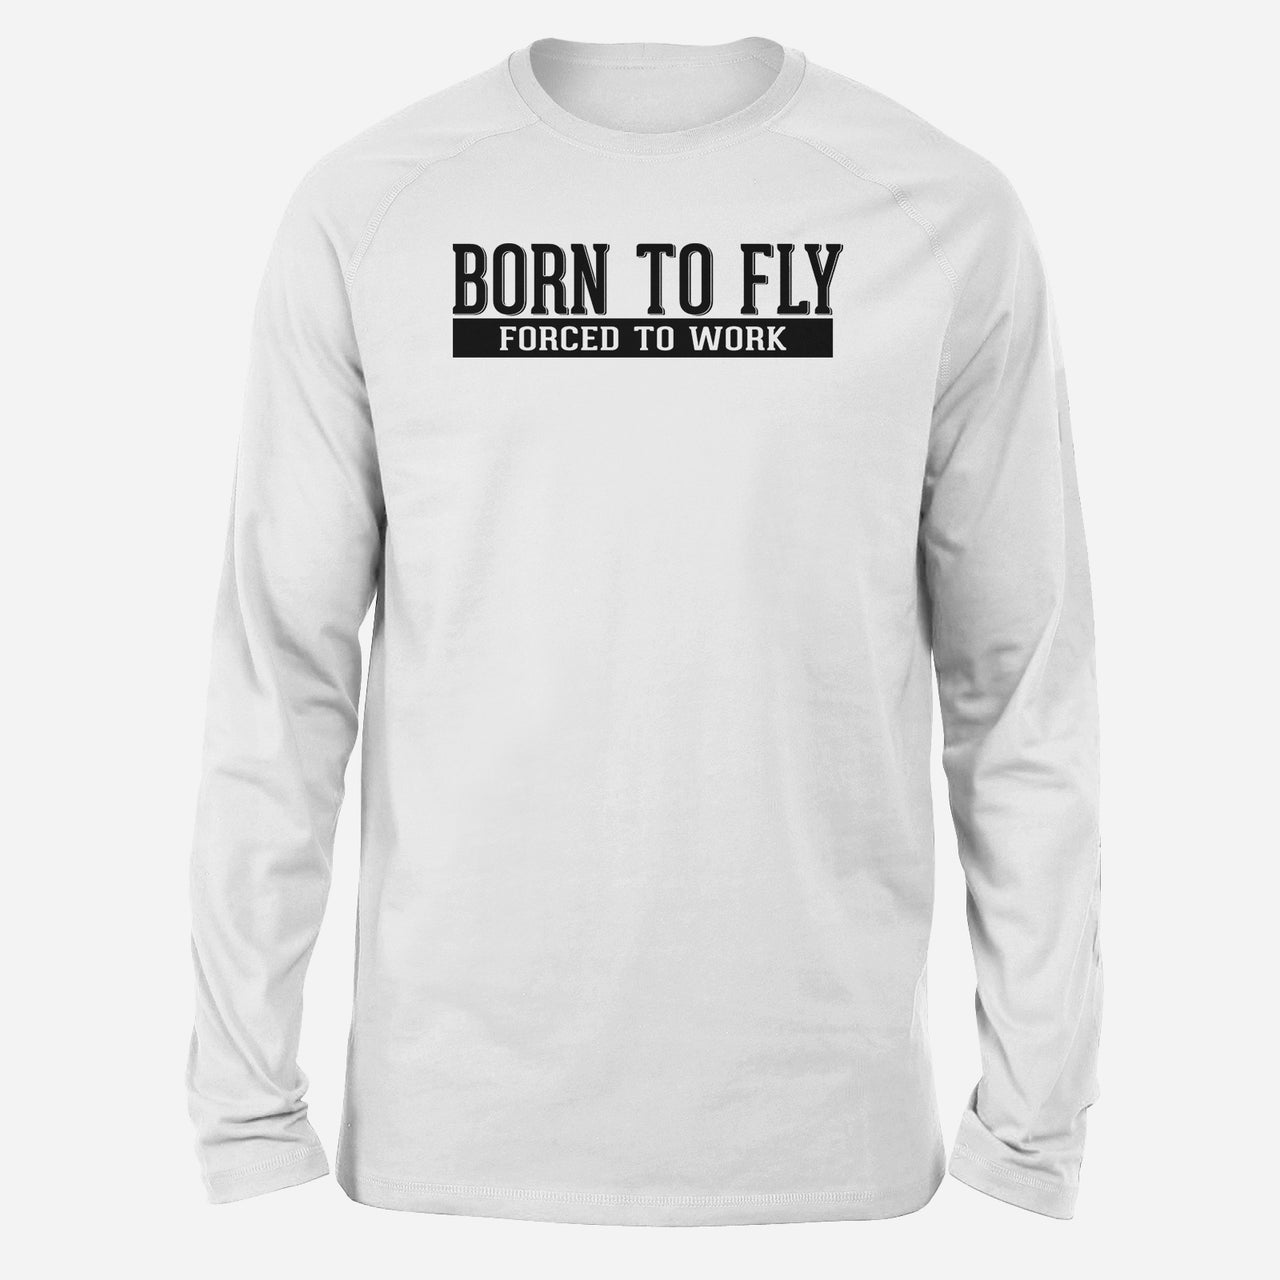 Born To Fly Forced To Work Designed Long-Sleeve T-Shirts